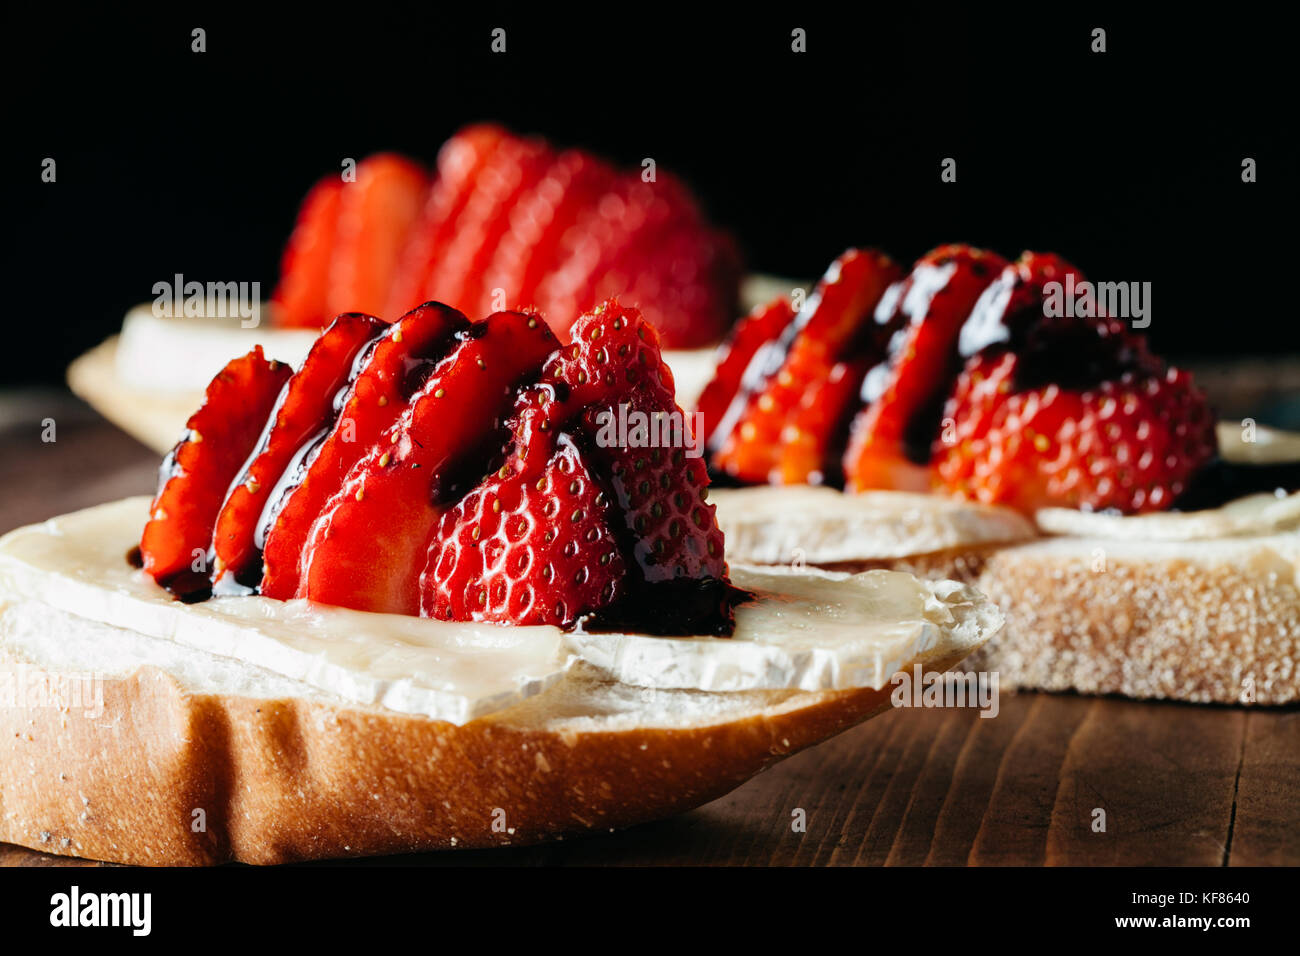 Canapes with brie cheese, fresh strawberries on rustic wooden surface Stock Photo